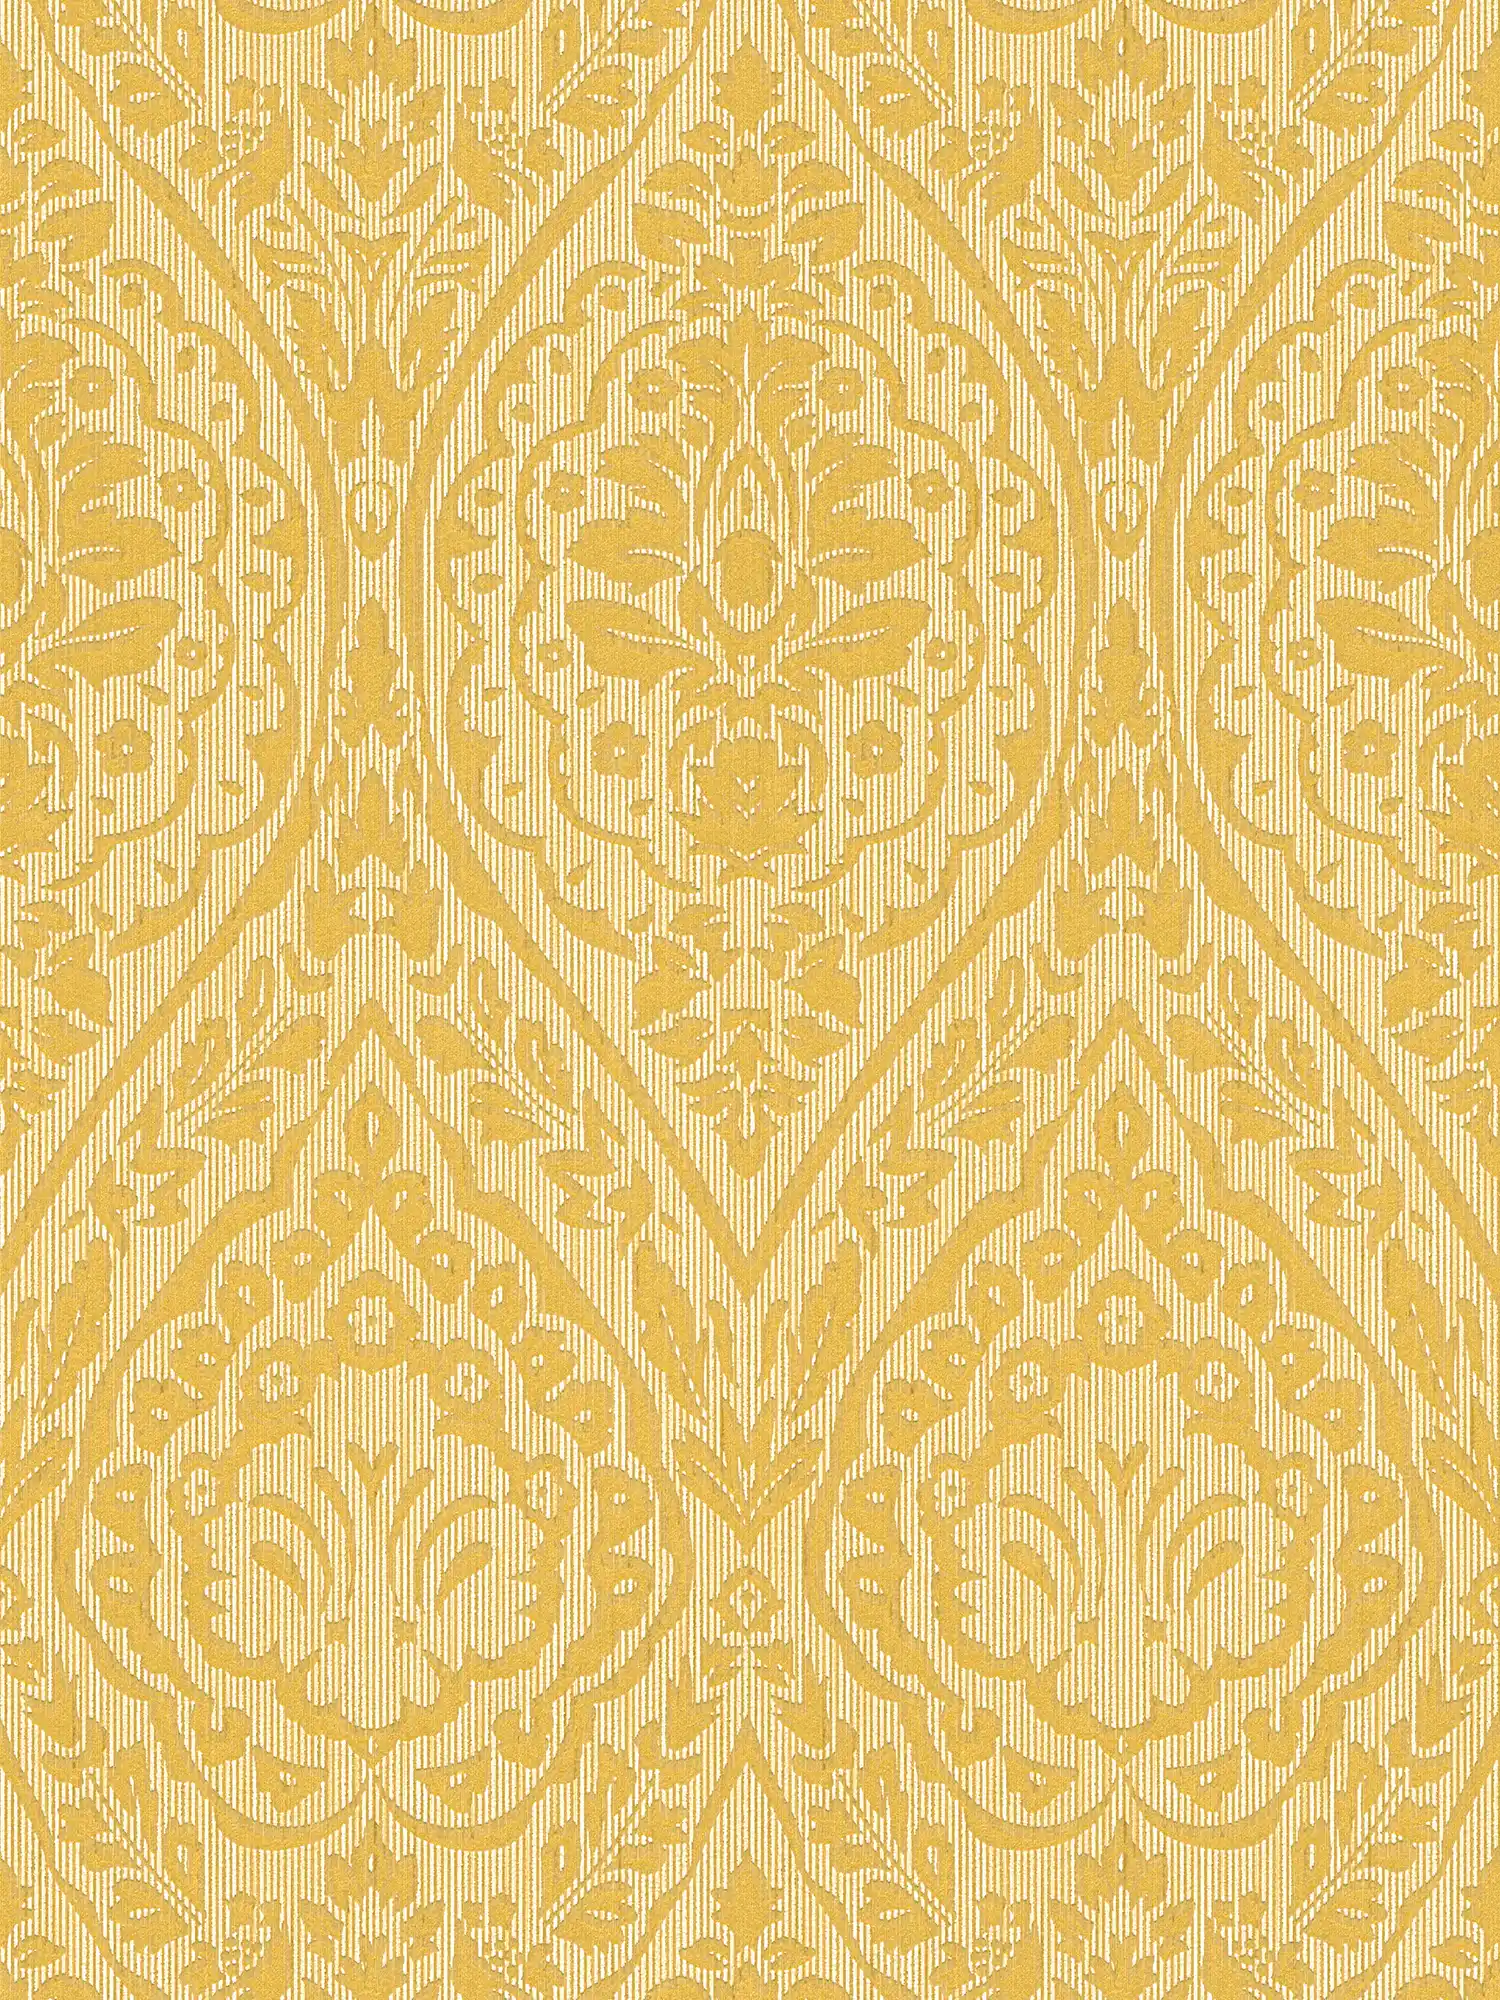 Non-woven wallpaper with structure design & ornamental pattern - yellow
